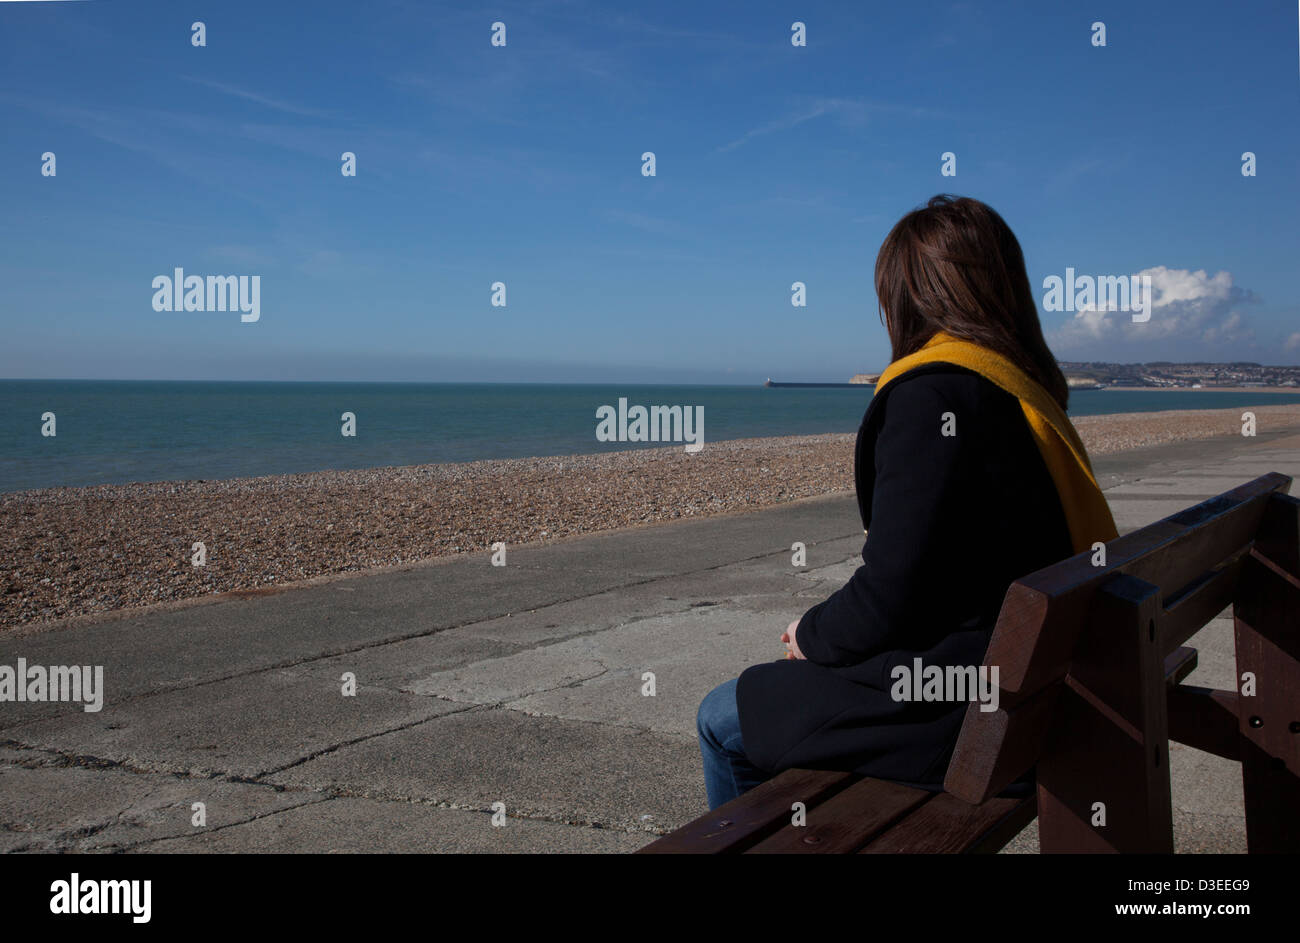 Back to camera shot of a woman coat and scarf sitting alone looking out to sea, signifying loss of a loved one. Stock Photo